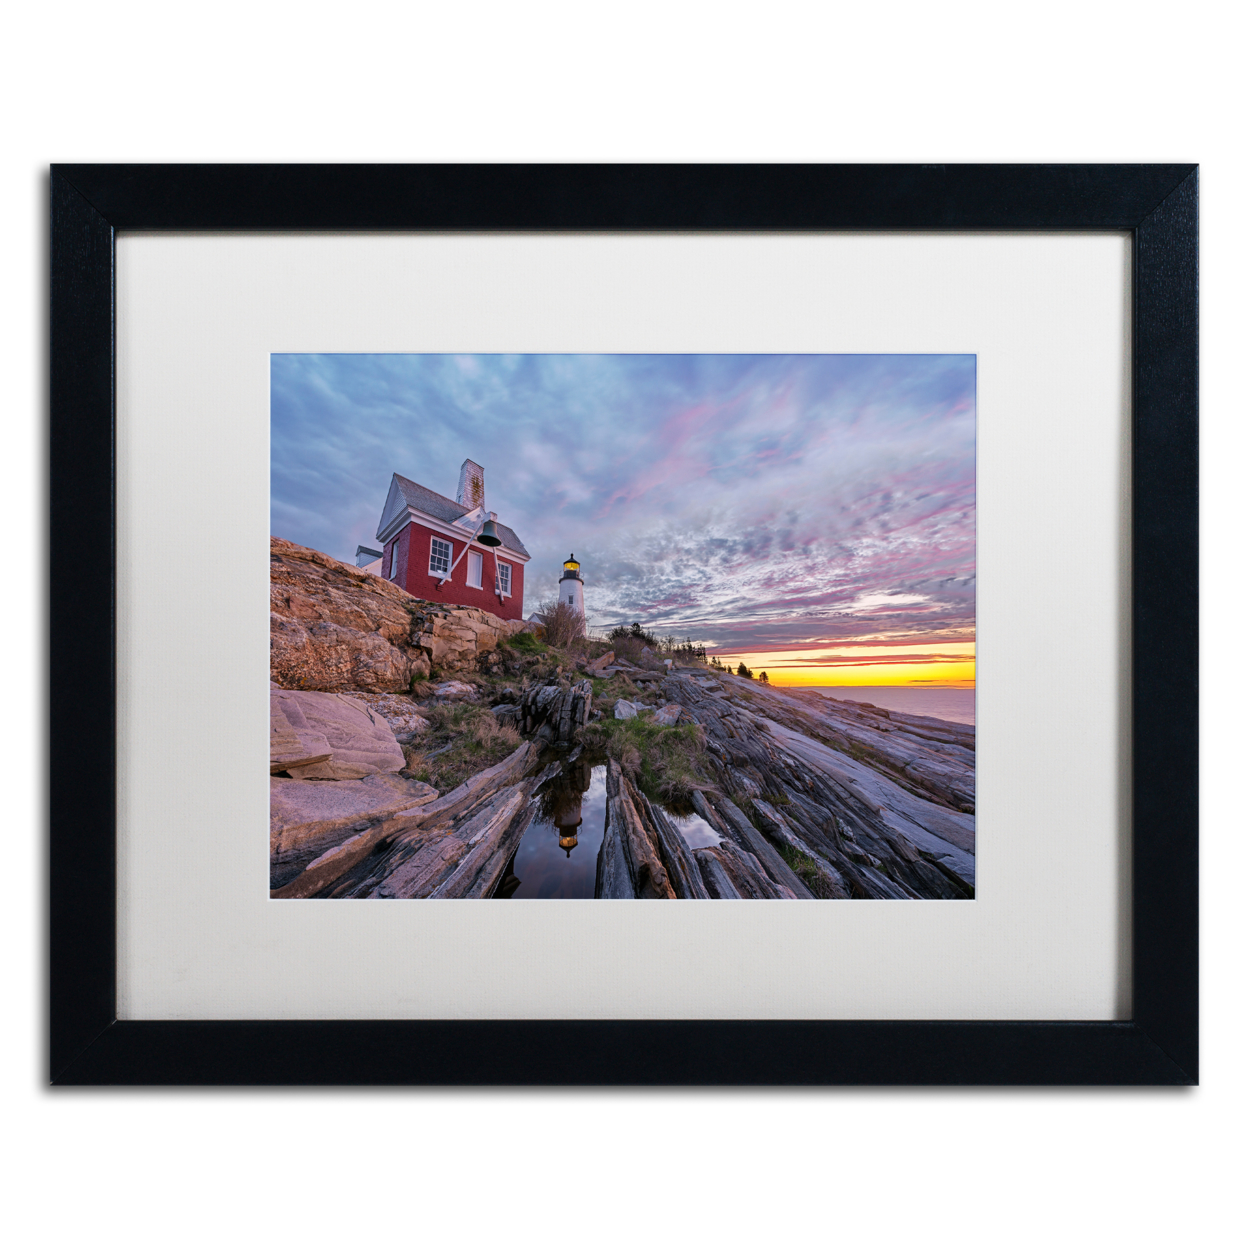 Michael Blanchette Photography 'Reflection In Stone' Black Wooden Framed Art 18 X 22 Inches